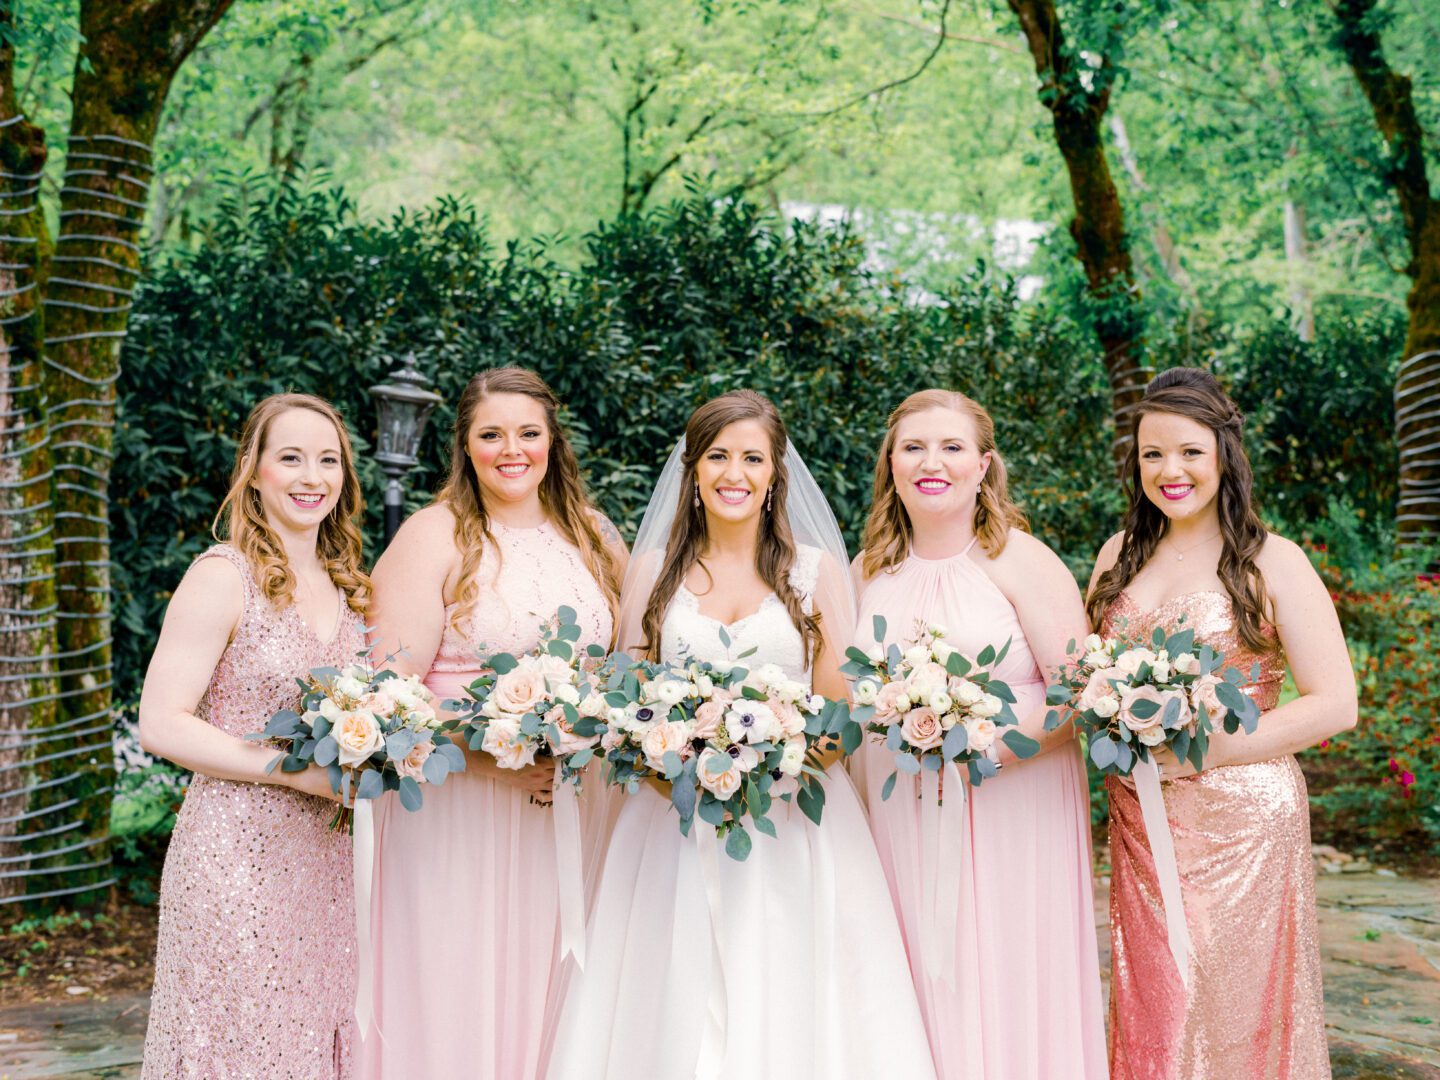 A group of bridesmaids in pink dresses pose for a photo.